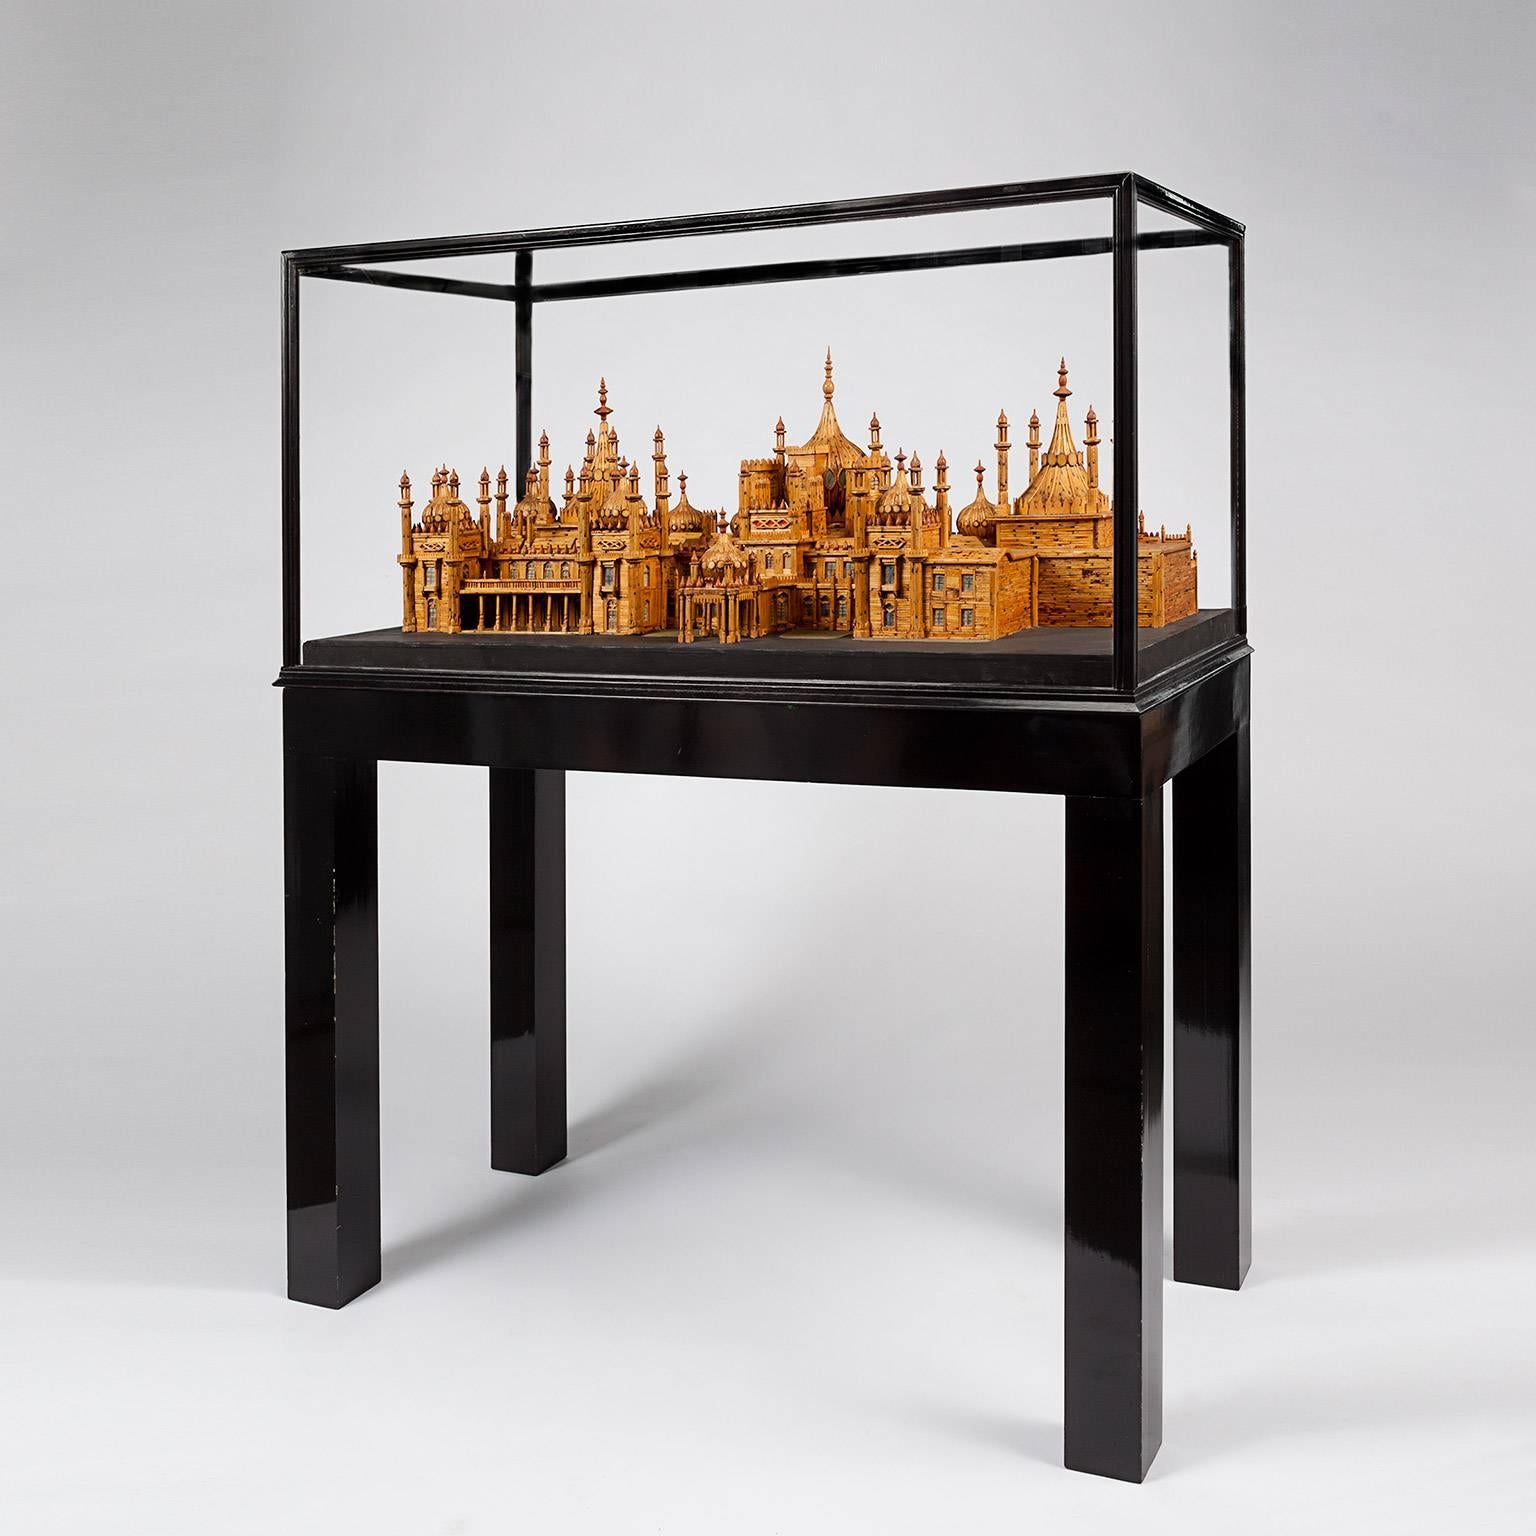 Made in the 1960s from over 40,000 matchsticks by Bernard Martell. The artist spent over 1700 hours meticulously reproducing the architectural splendor of the Brighton Royal Pavilion in a 1:100 scale model. It was first exhibited at Marlborough